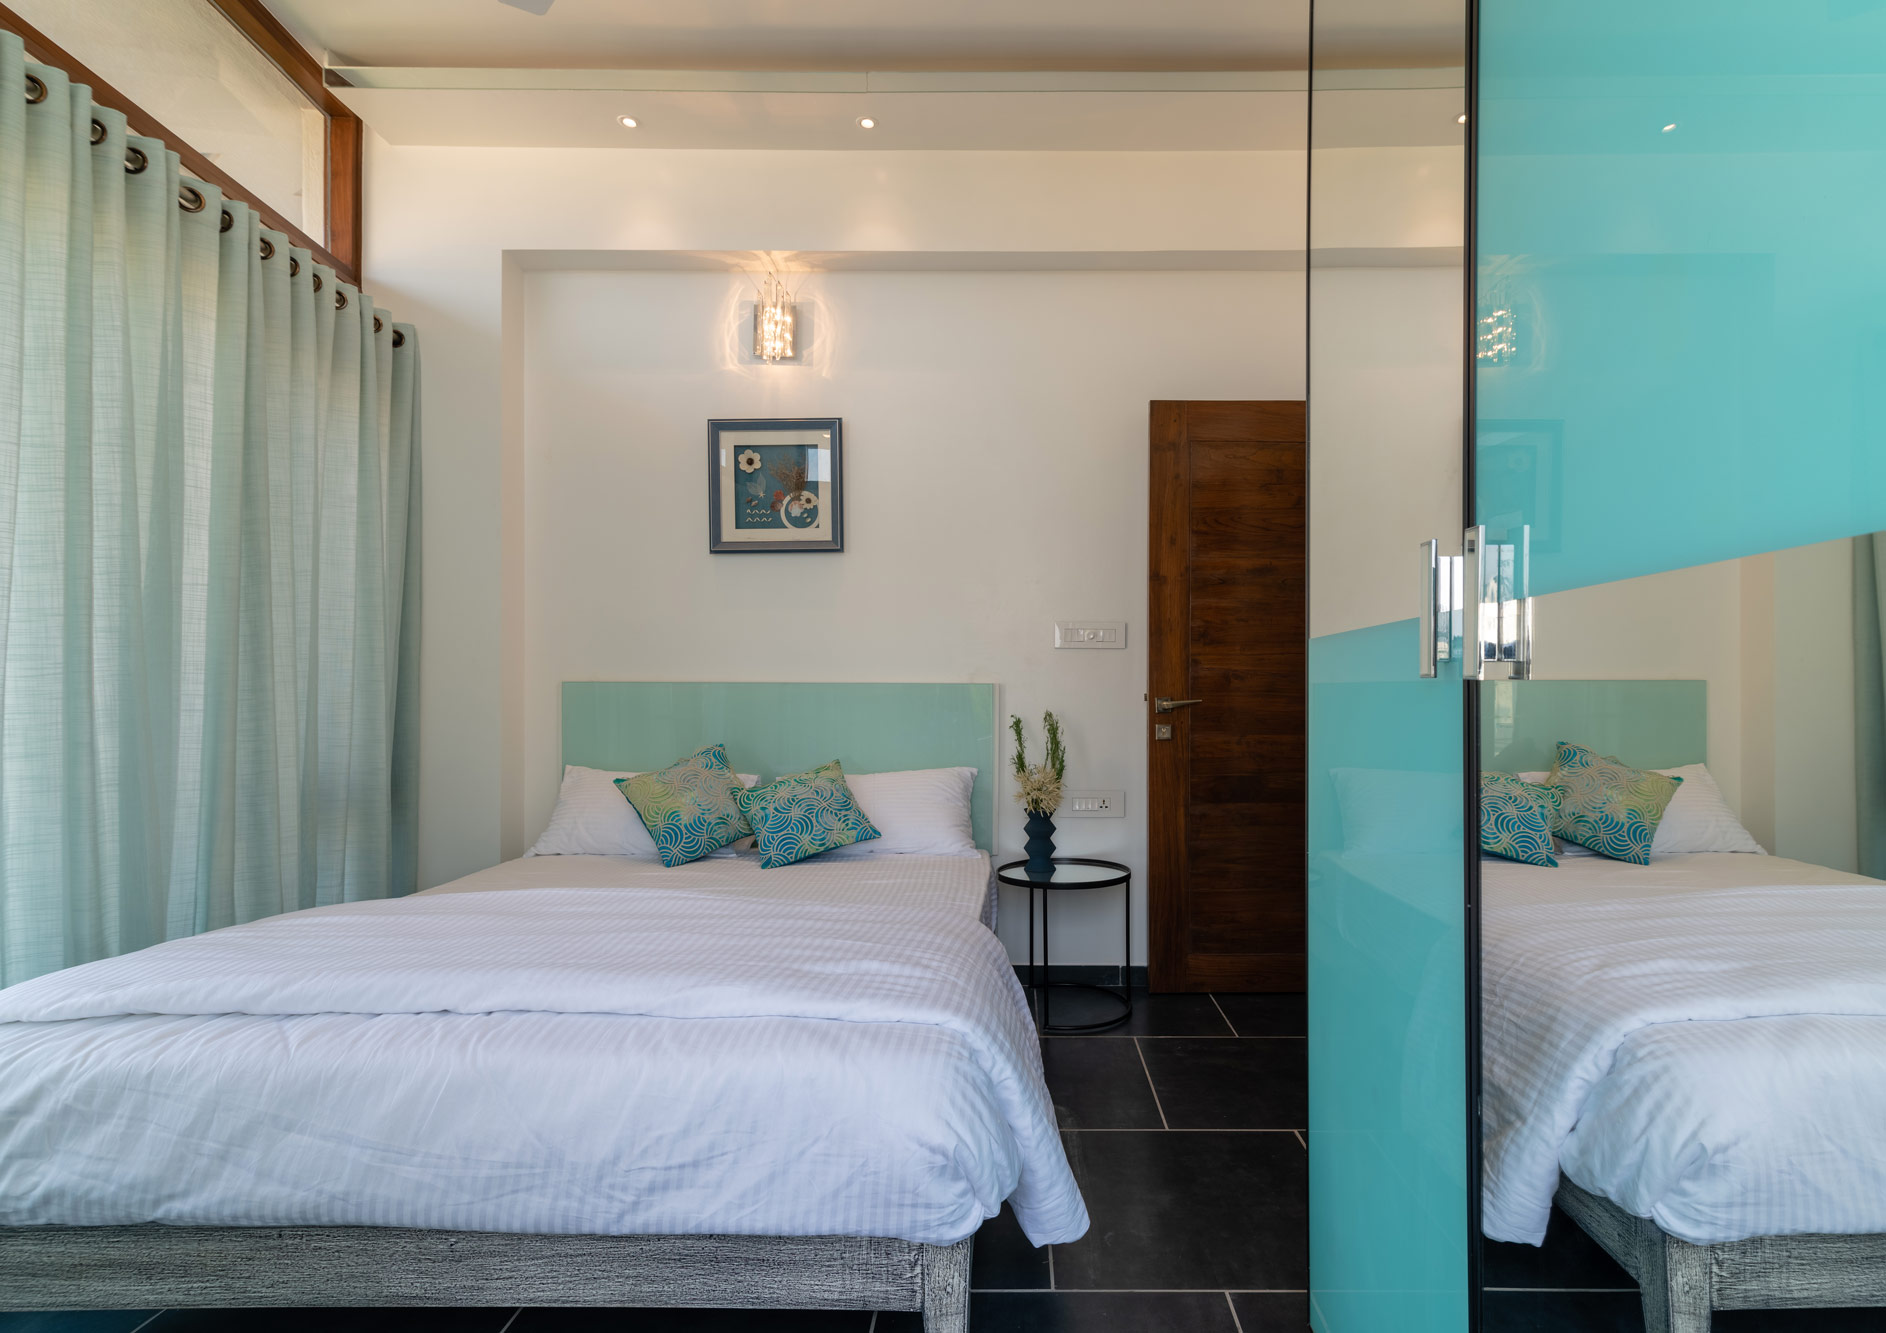 The Azure Bedroom in the Glass apartment at the Jazminn, luxury service apartments for rent in Bangalore